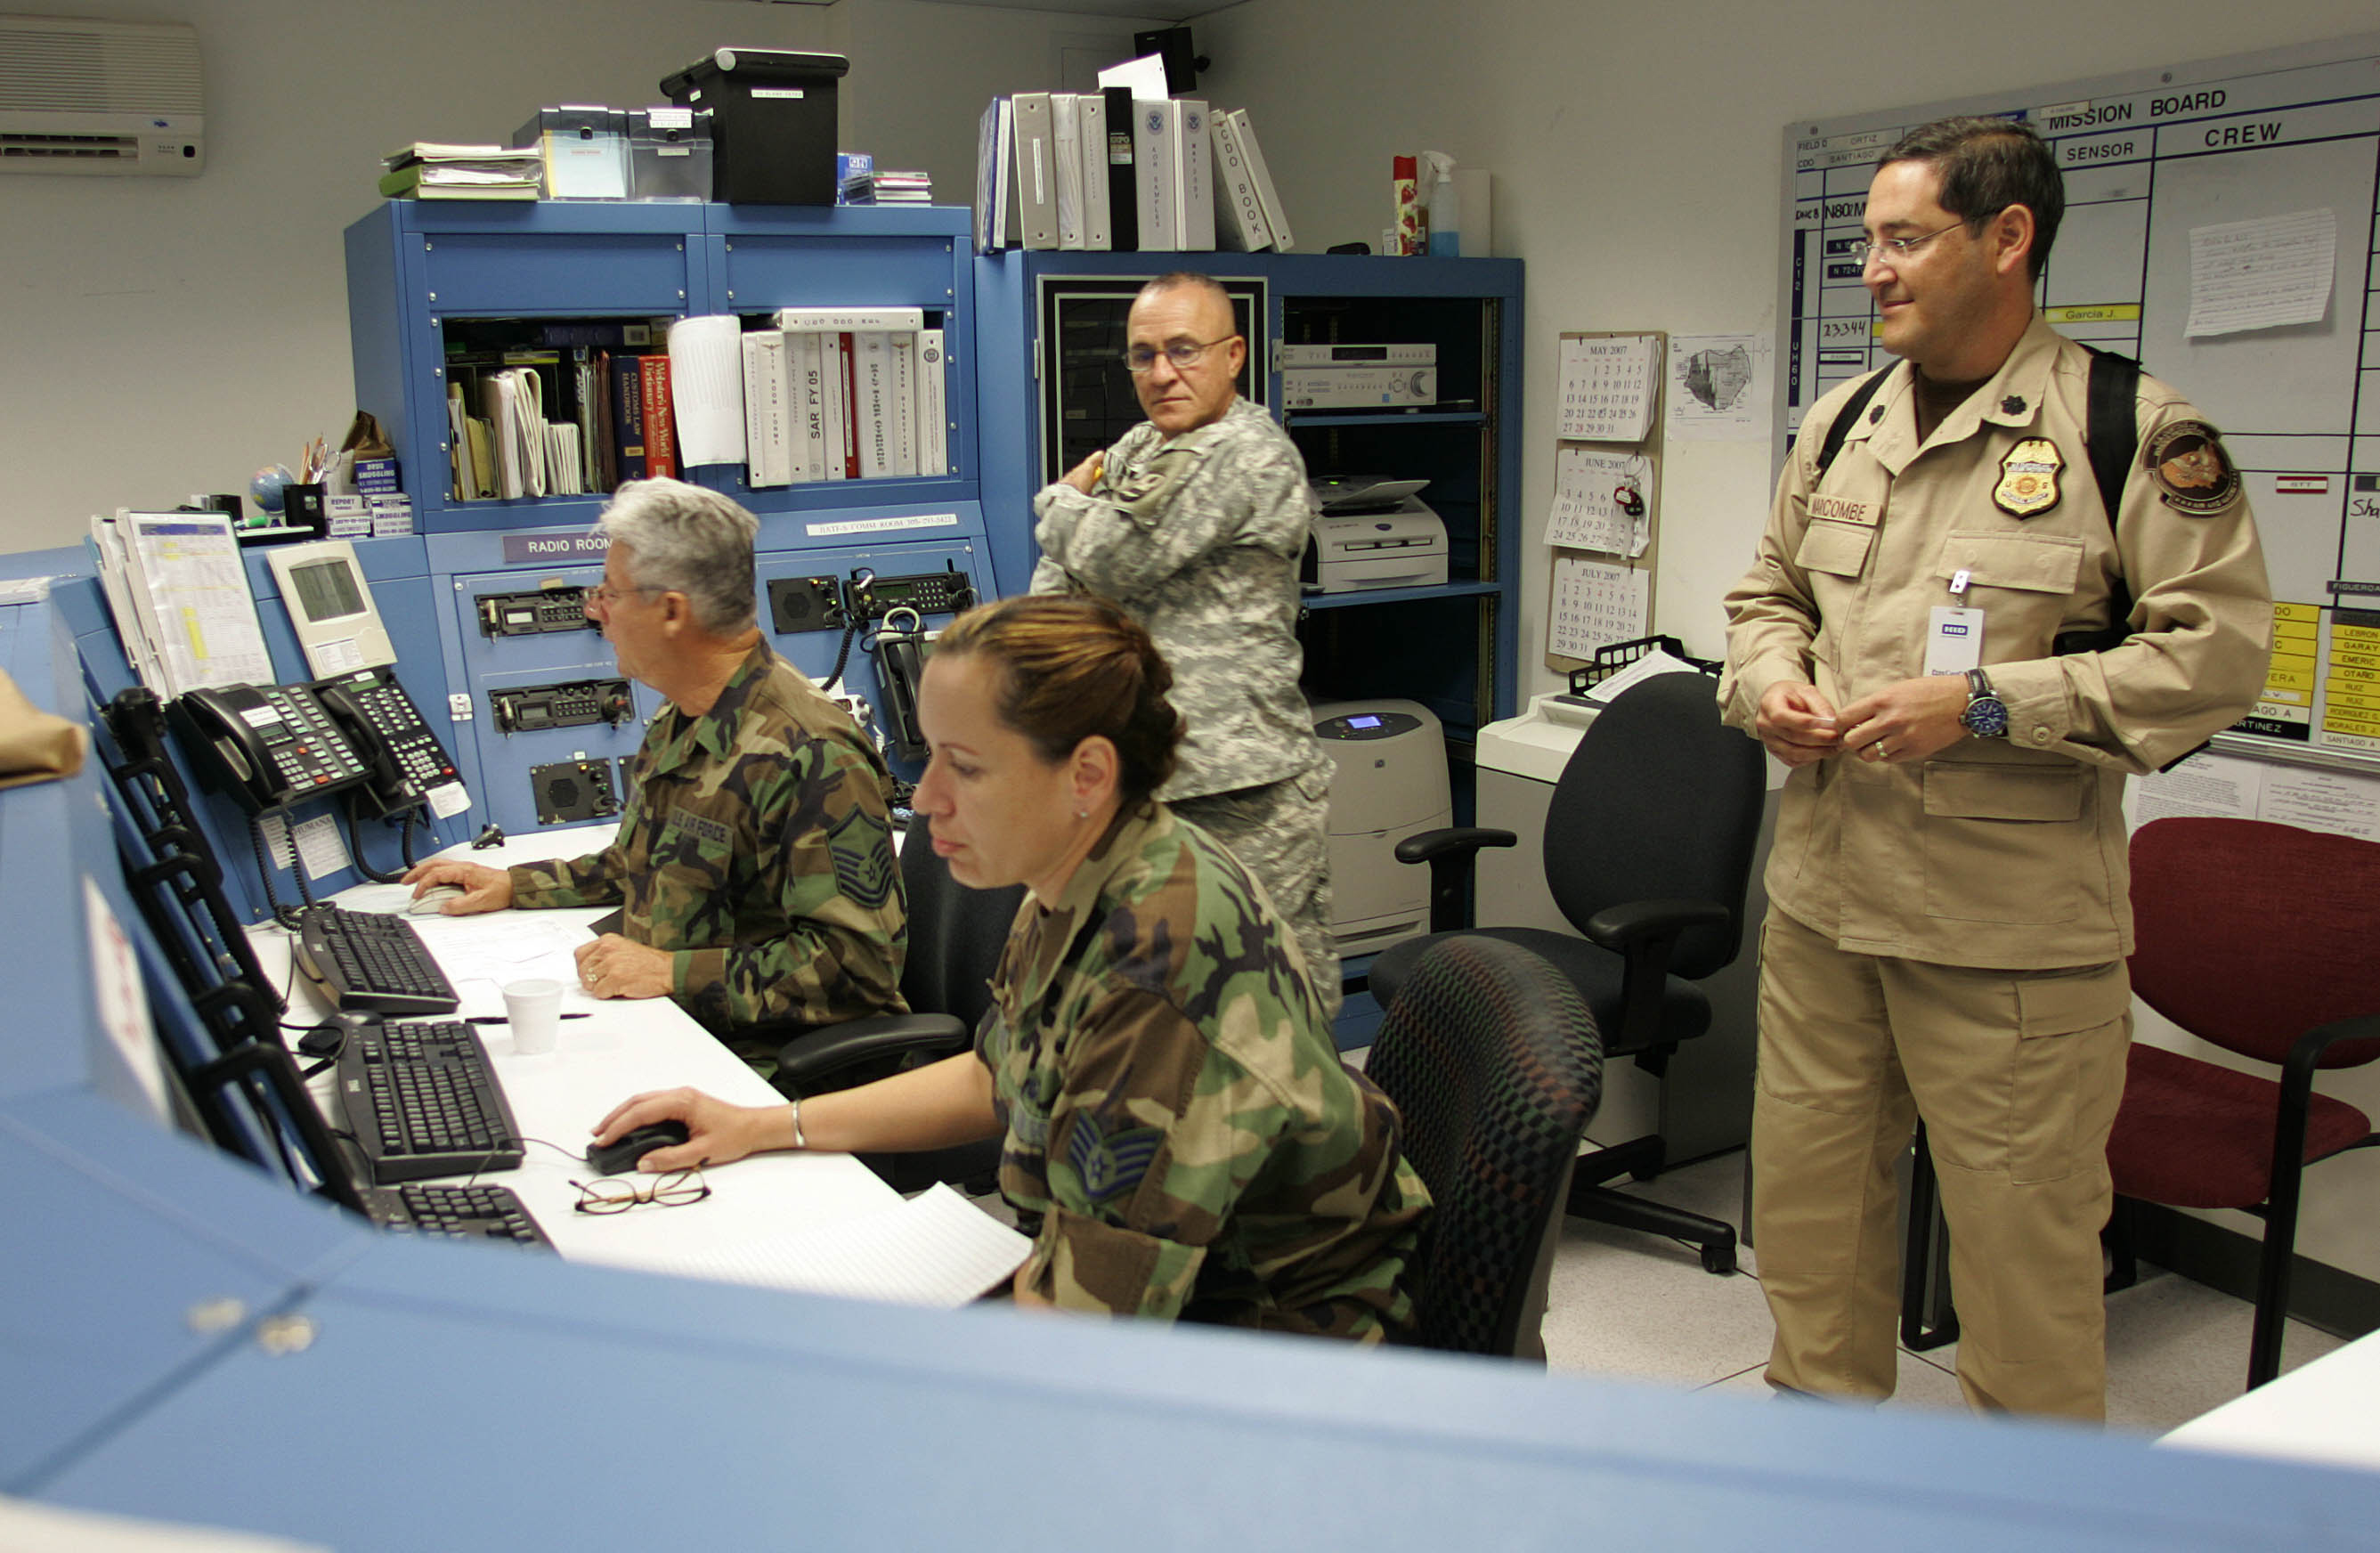 Customs and Border Protection works side by side with interagency partners at the Caribbean Air and Marine Operations Center.